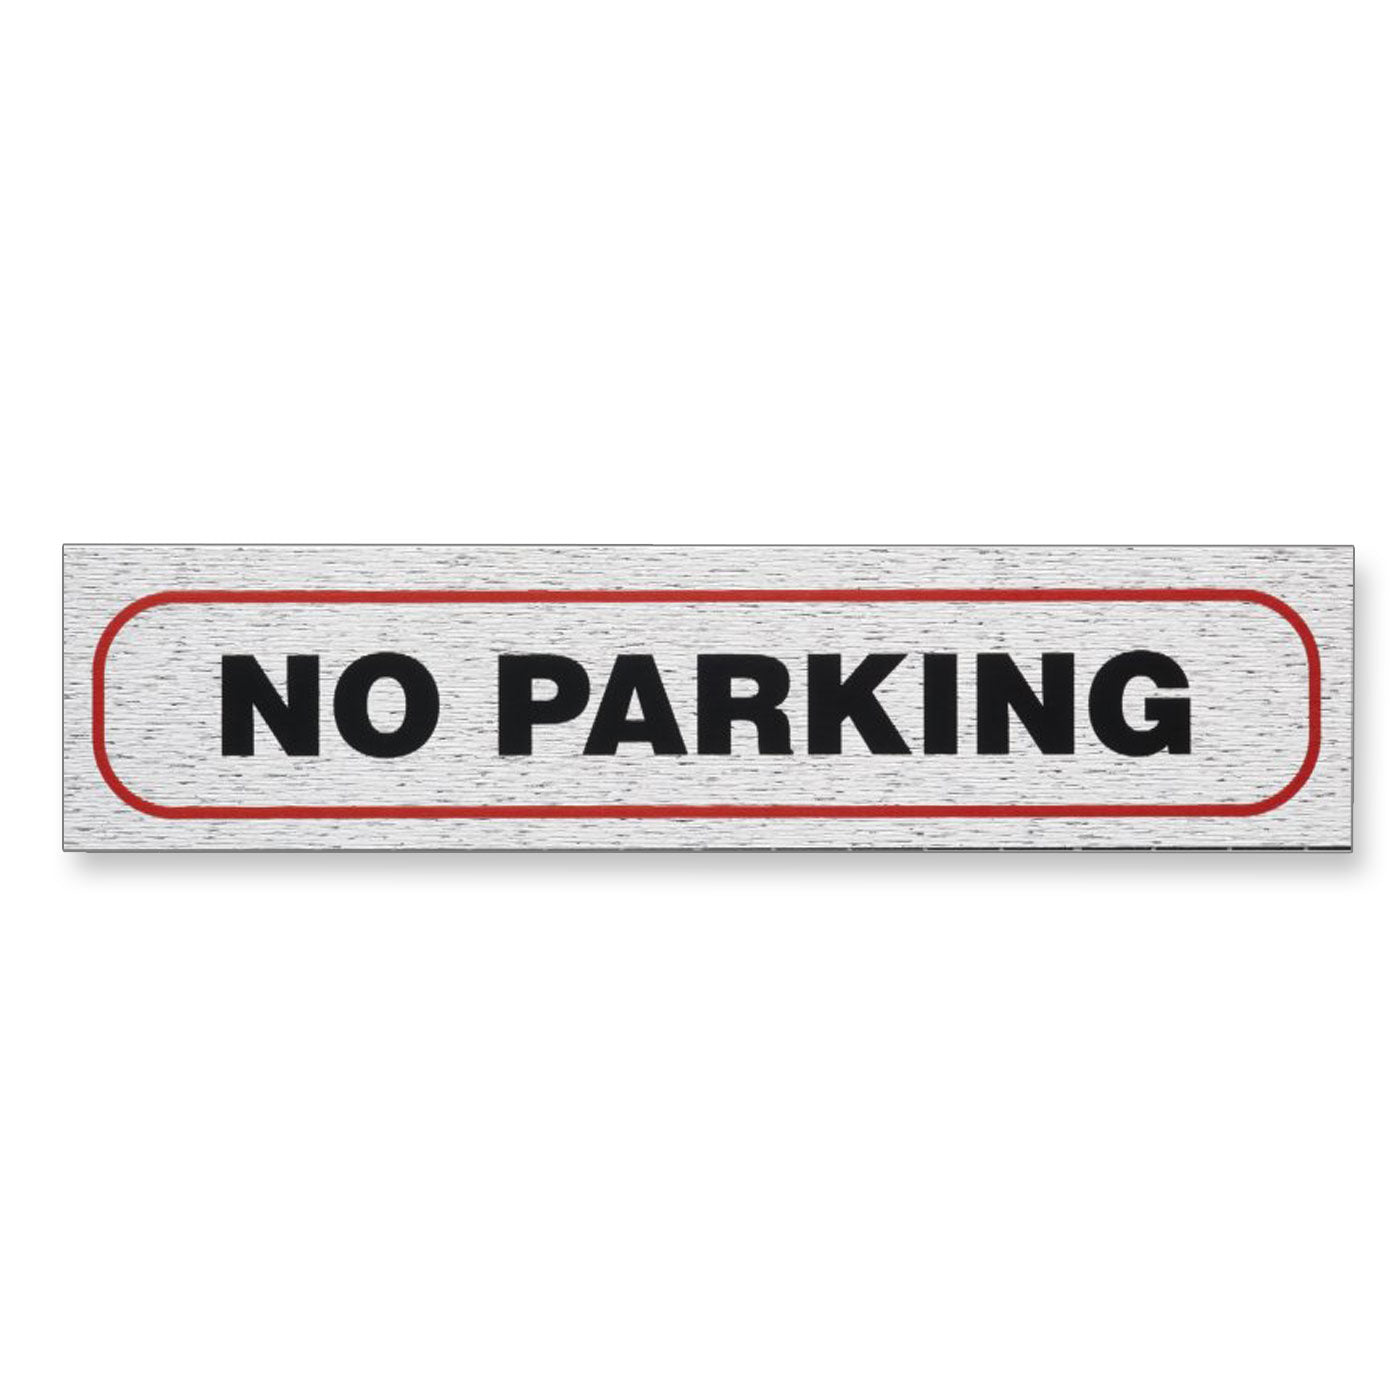 Information Sign "NO PARKING" 17 x 4 cm [Self-Adhesive]